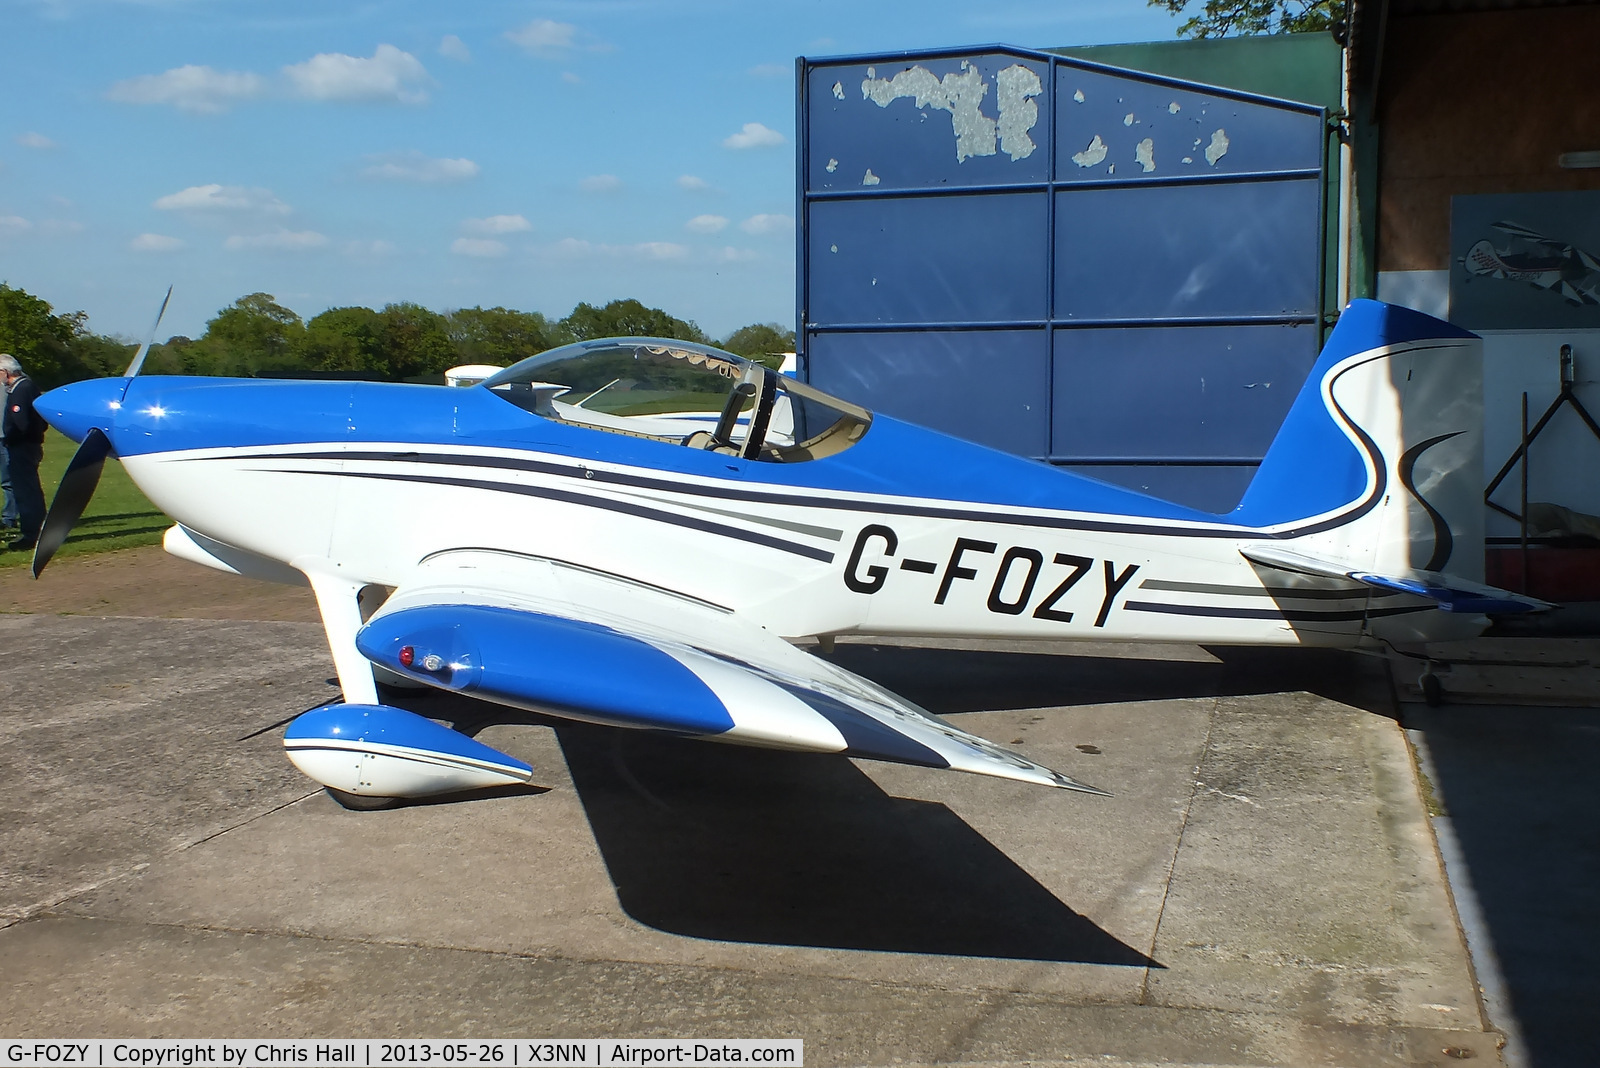 G-FOZY, 2012 Vans RV-7 C/N PFA 323-14150, at Stoke Golding airfield, set amongst beautiful open countryside on the Leicestershire Warwickshire borders